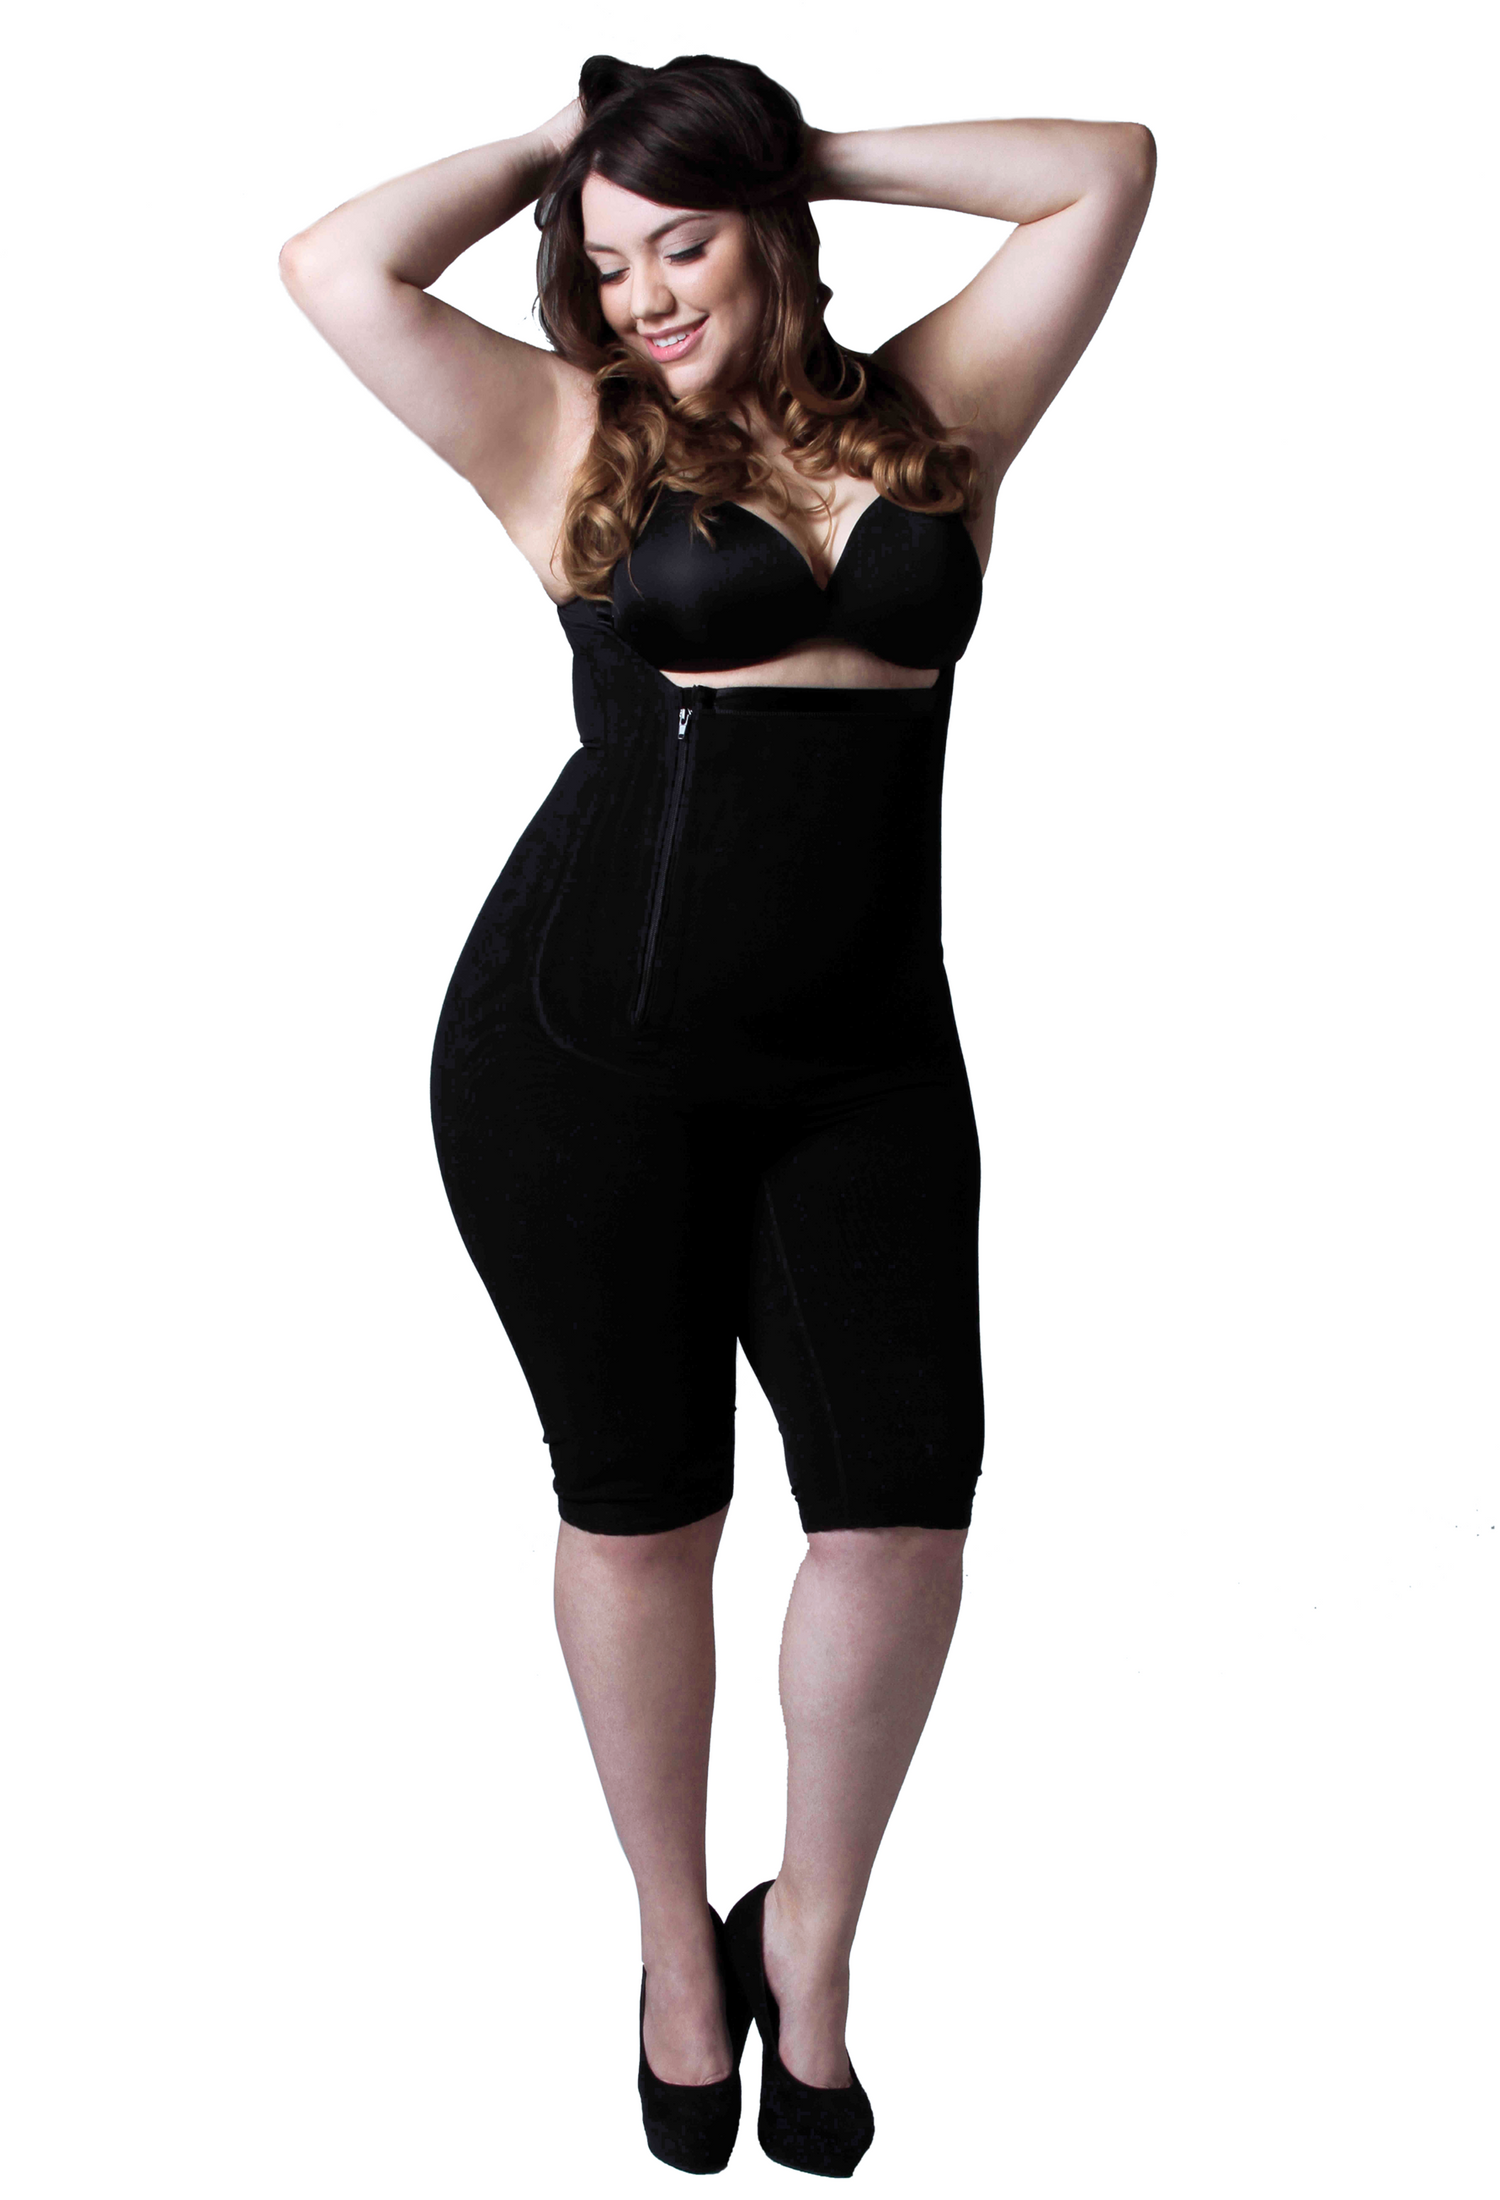 How to Measure Shapewear Size